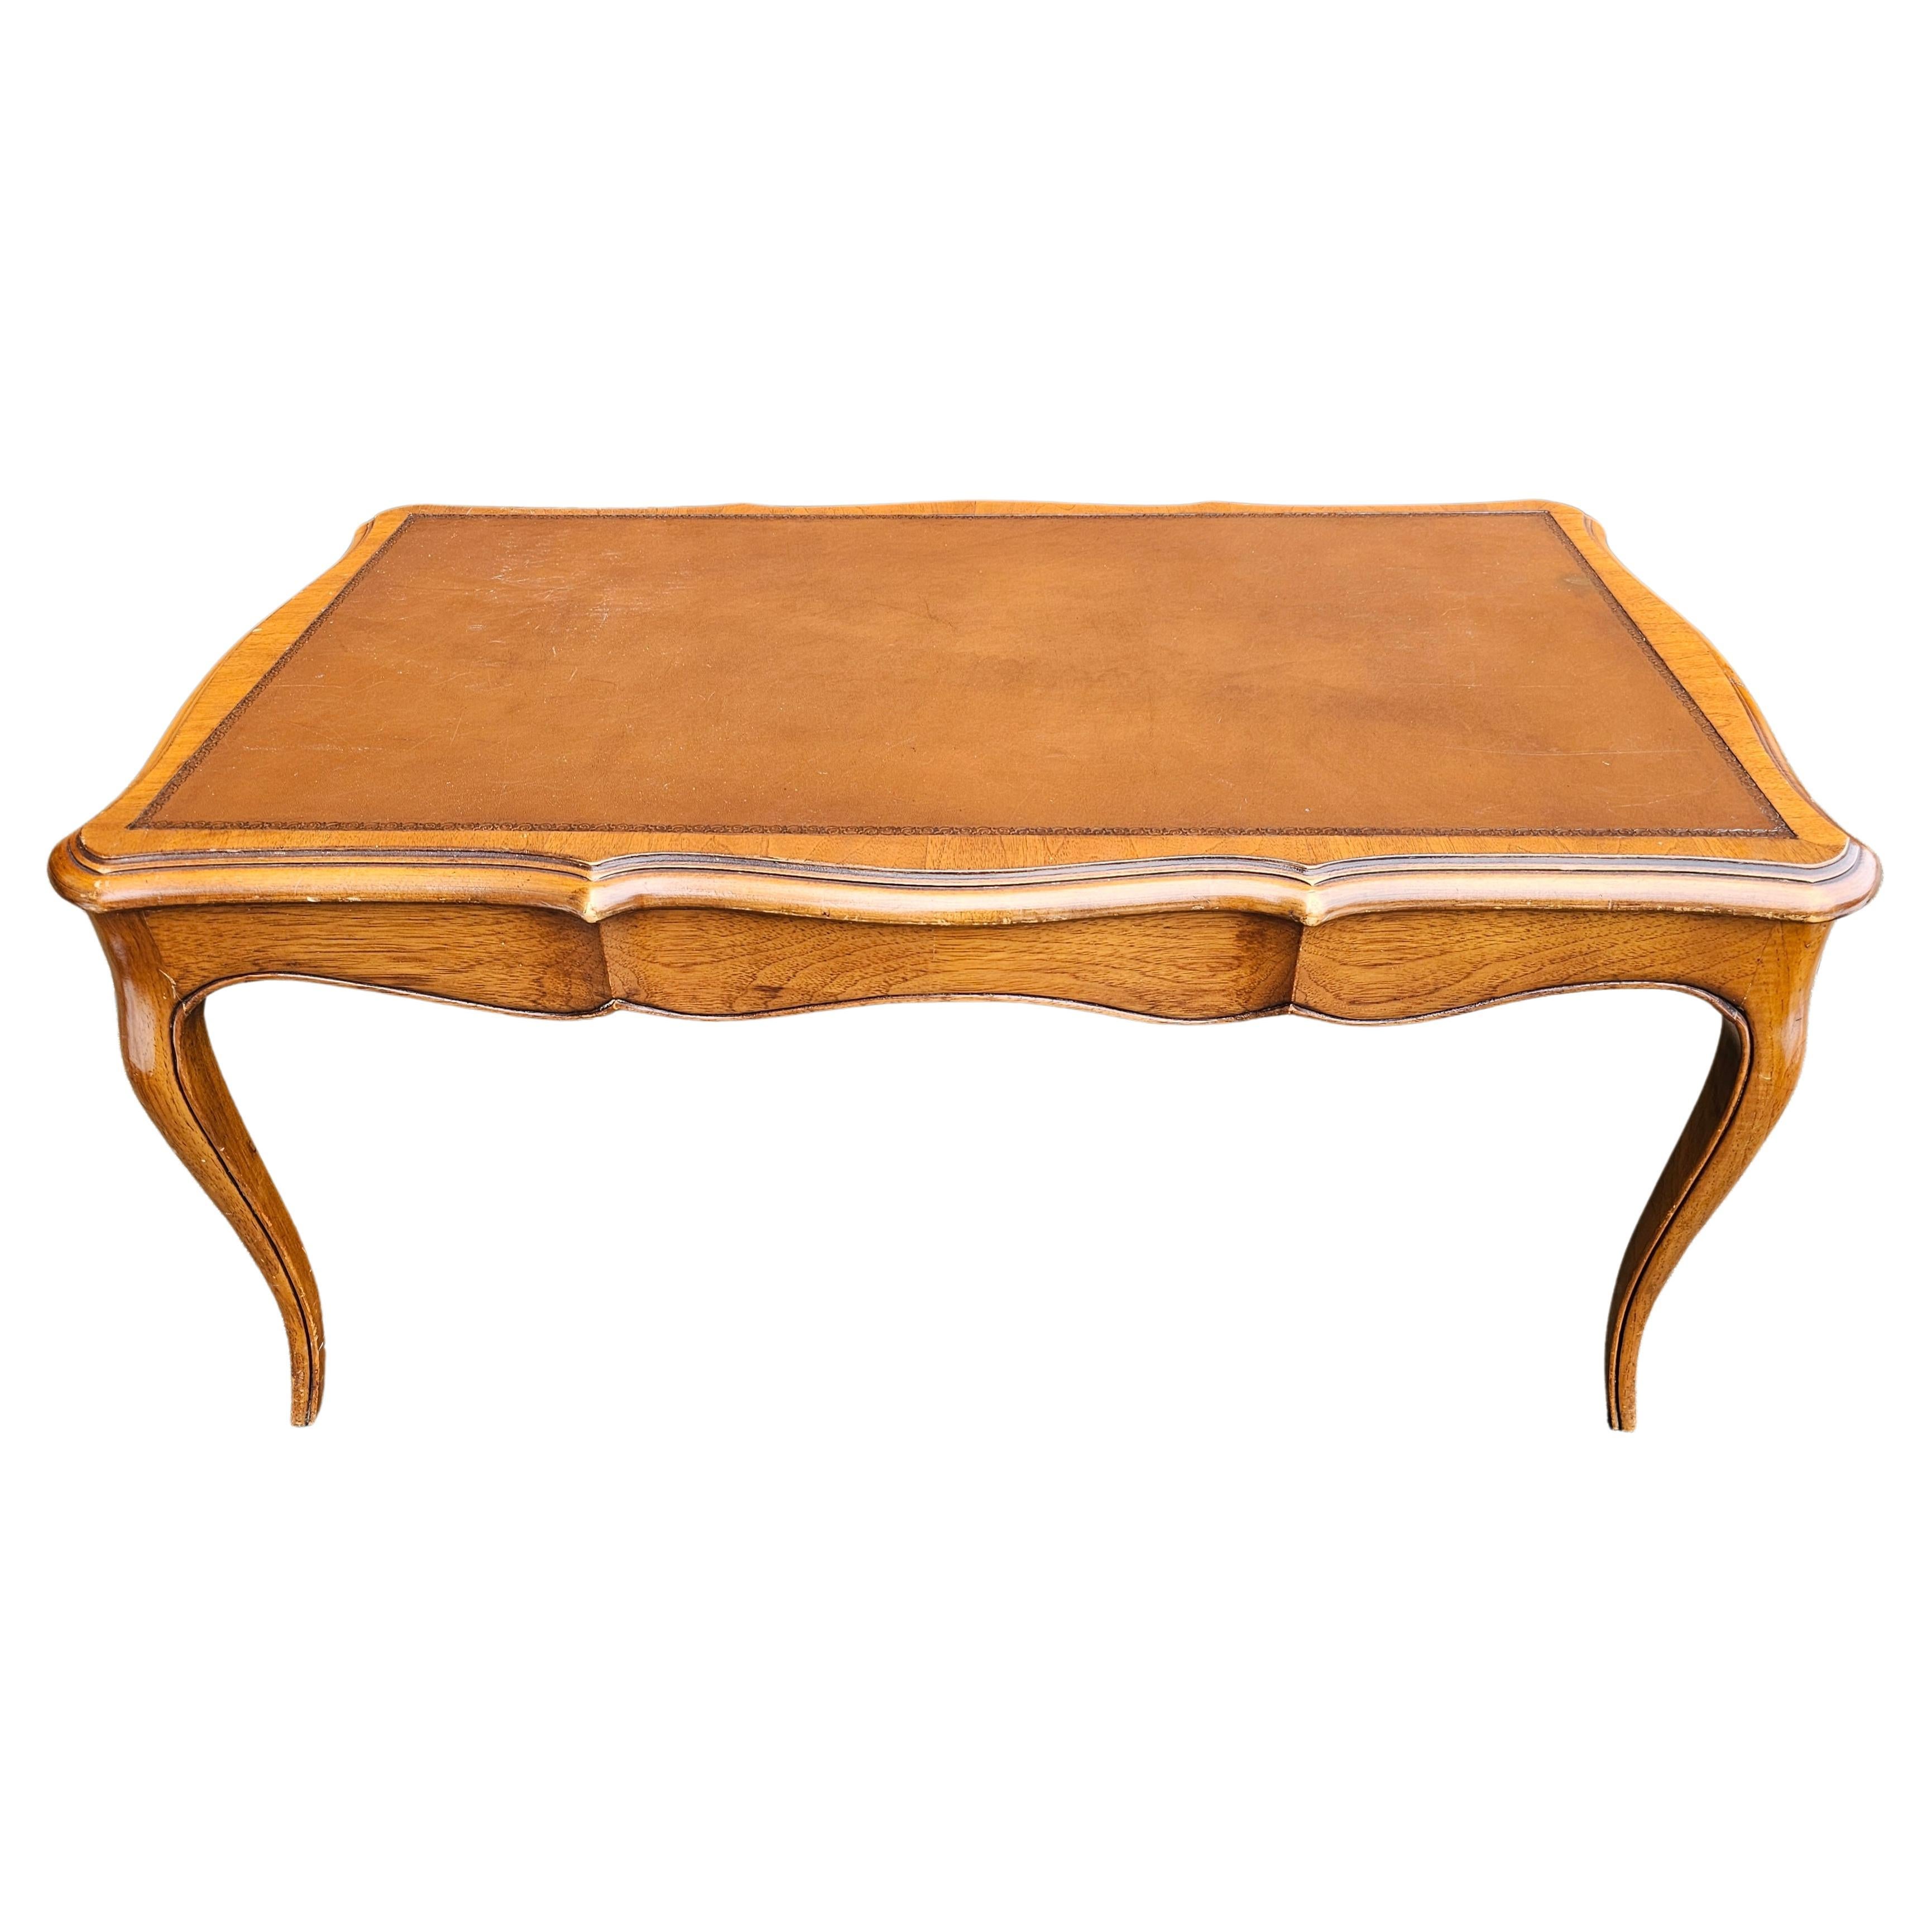 W & J Sloane Louis XV Style Tooled Leather Inset Top Walnut Coffee Table For Sale